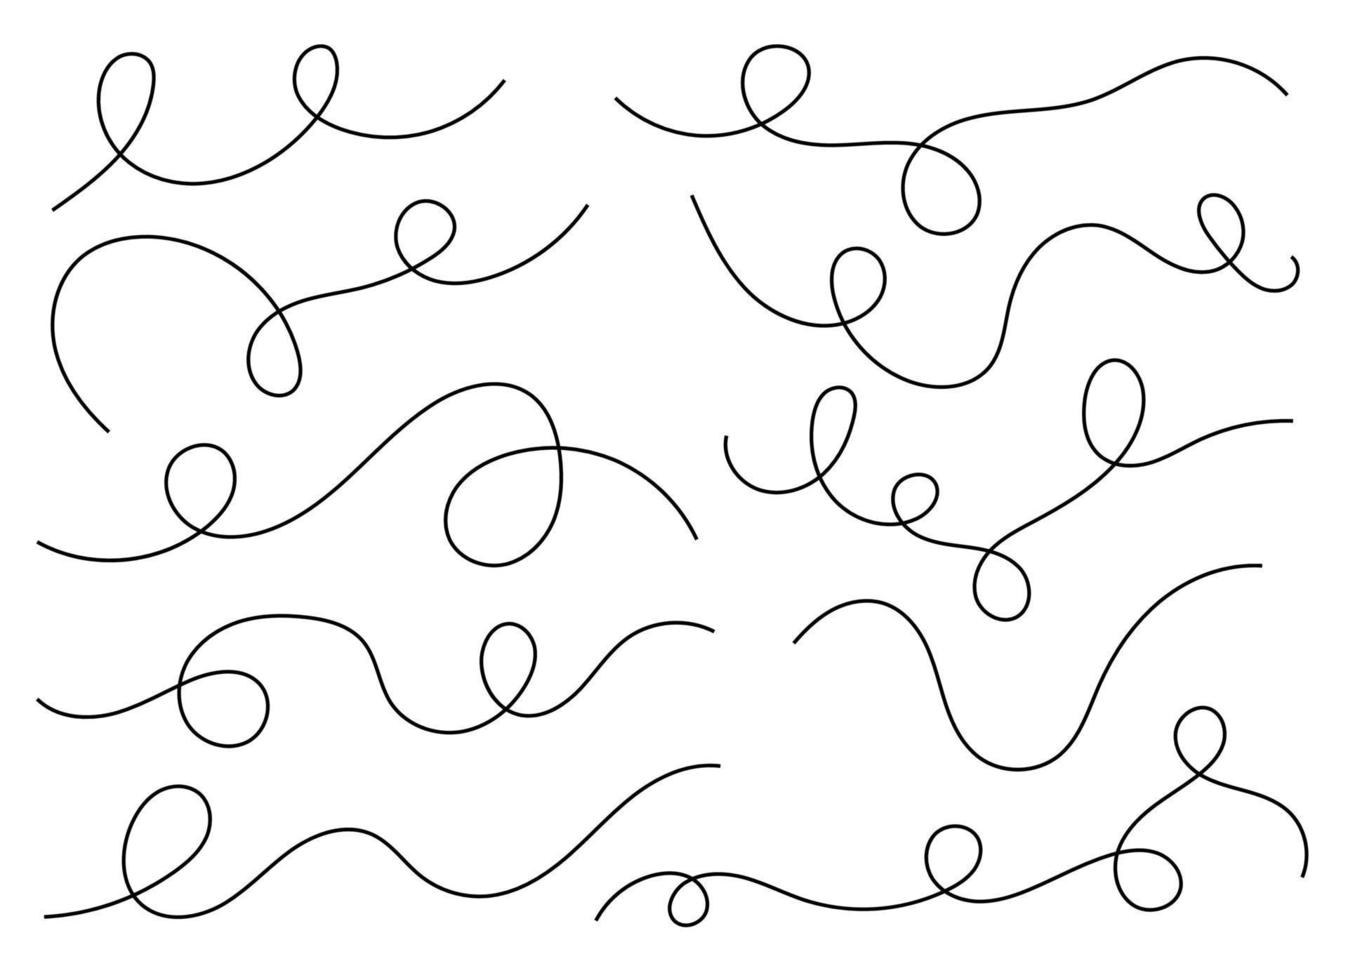 Hand drawn curved line shape. Curved line icon collection. Vector illustration isolated on white background